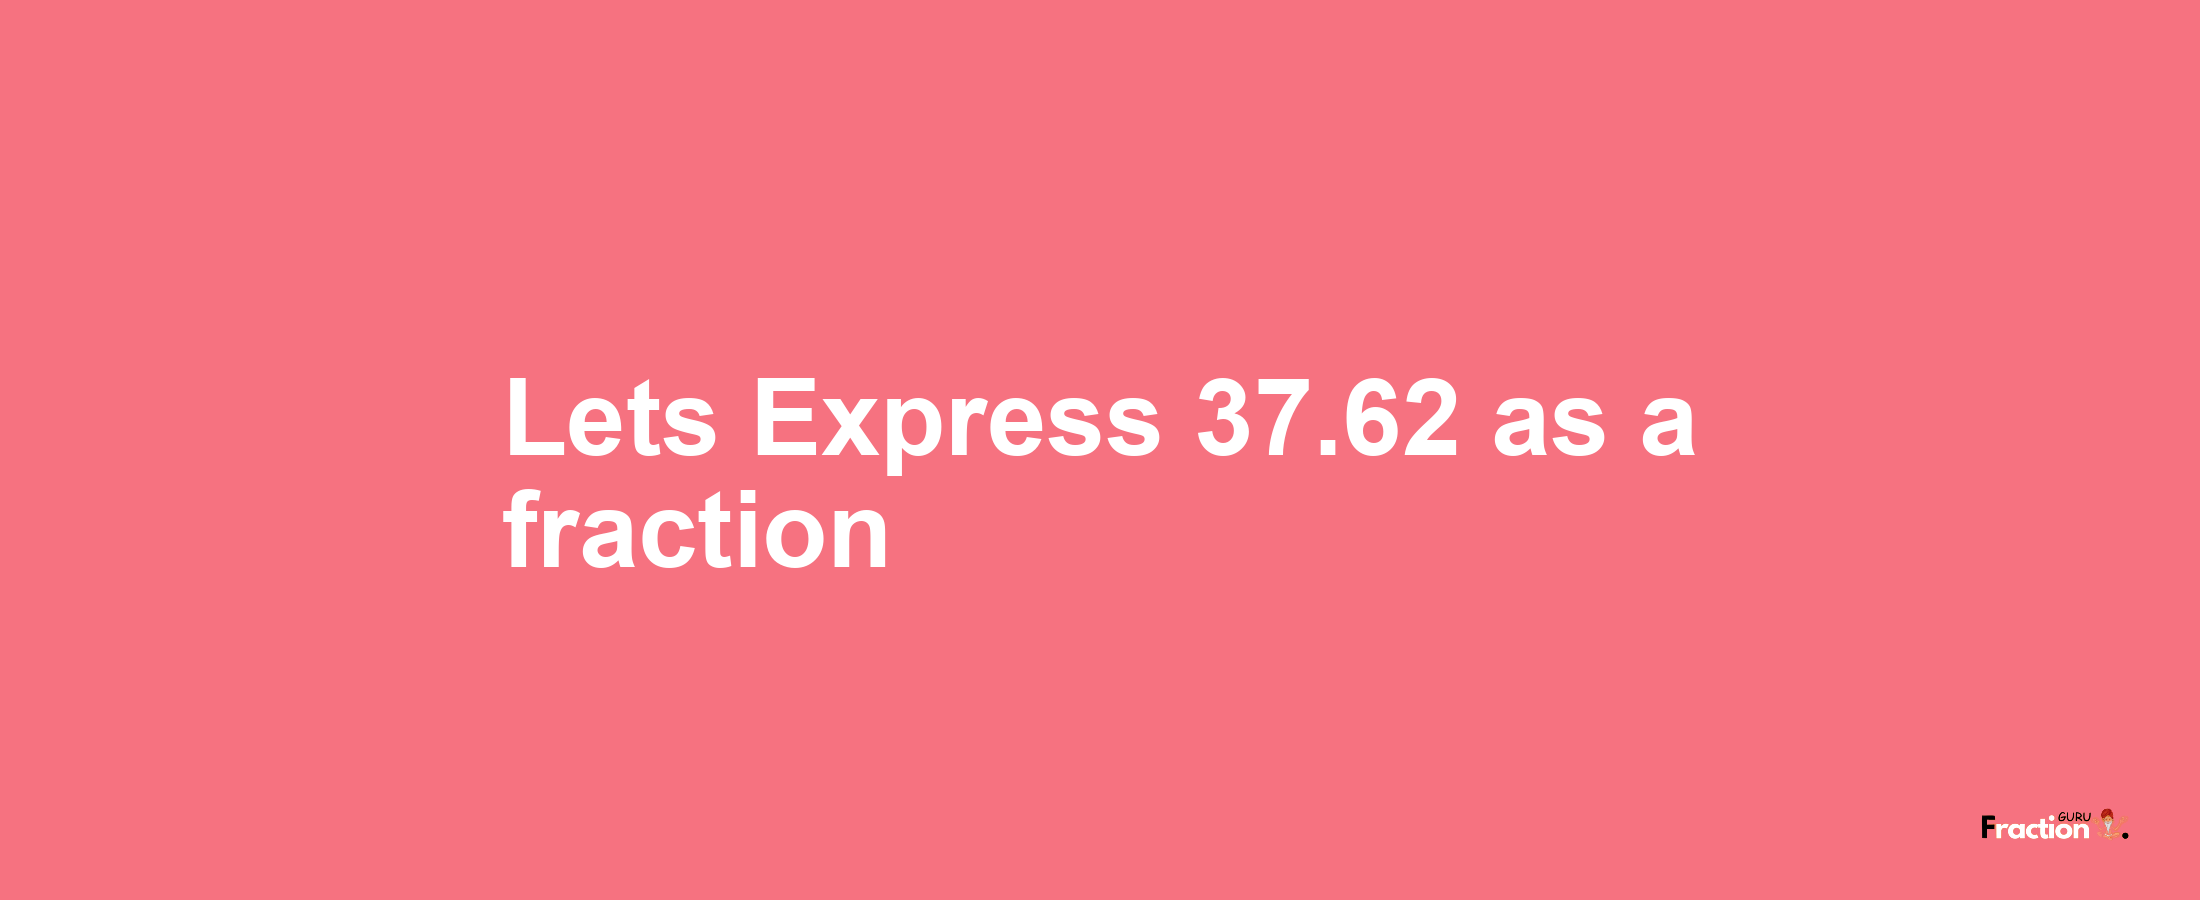 Lets Express 37.62 as afraction